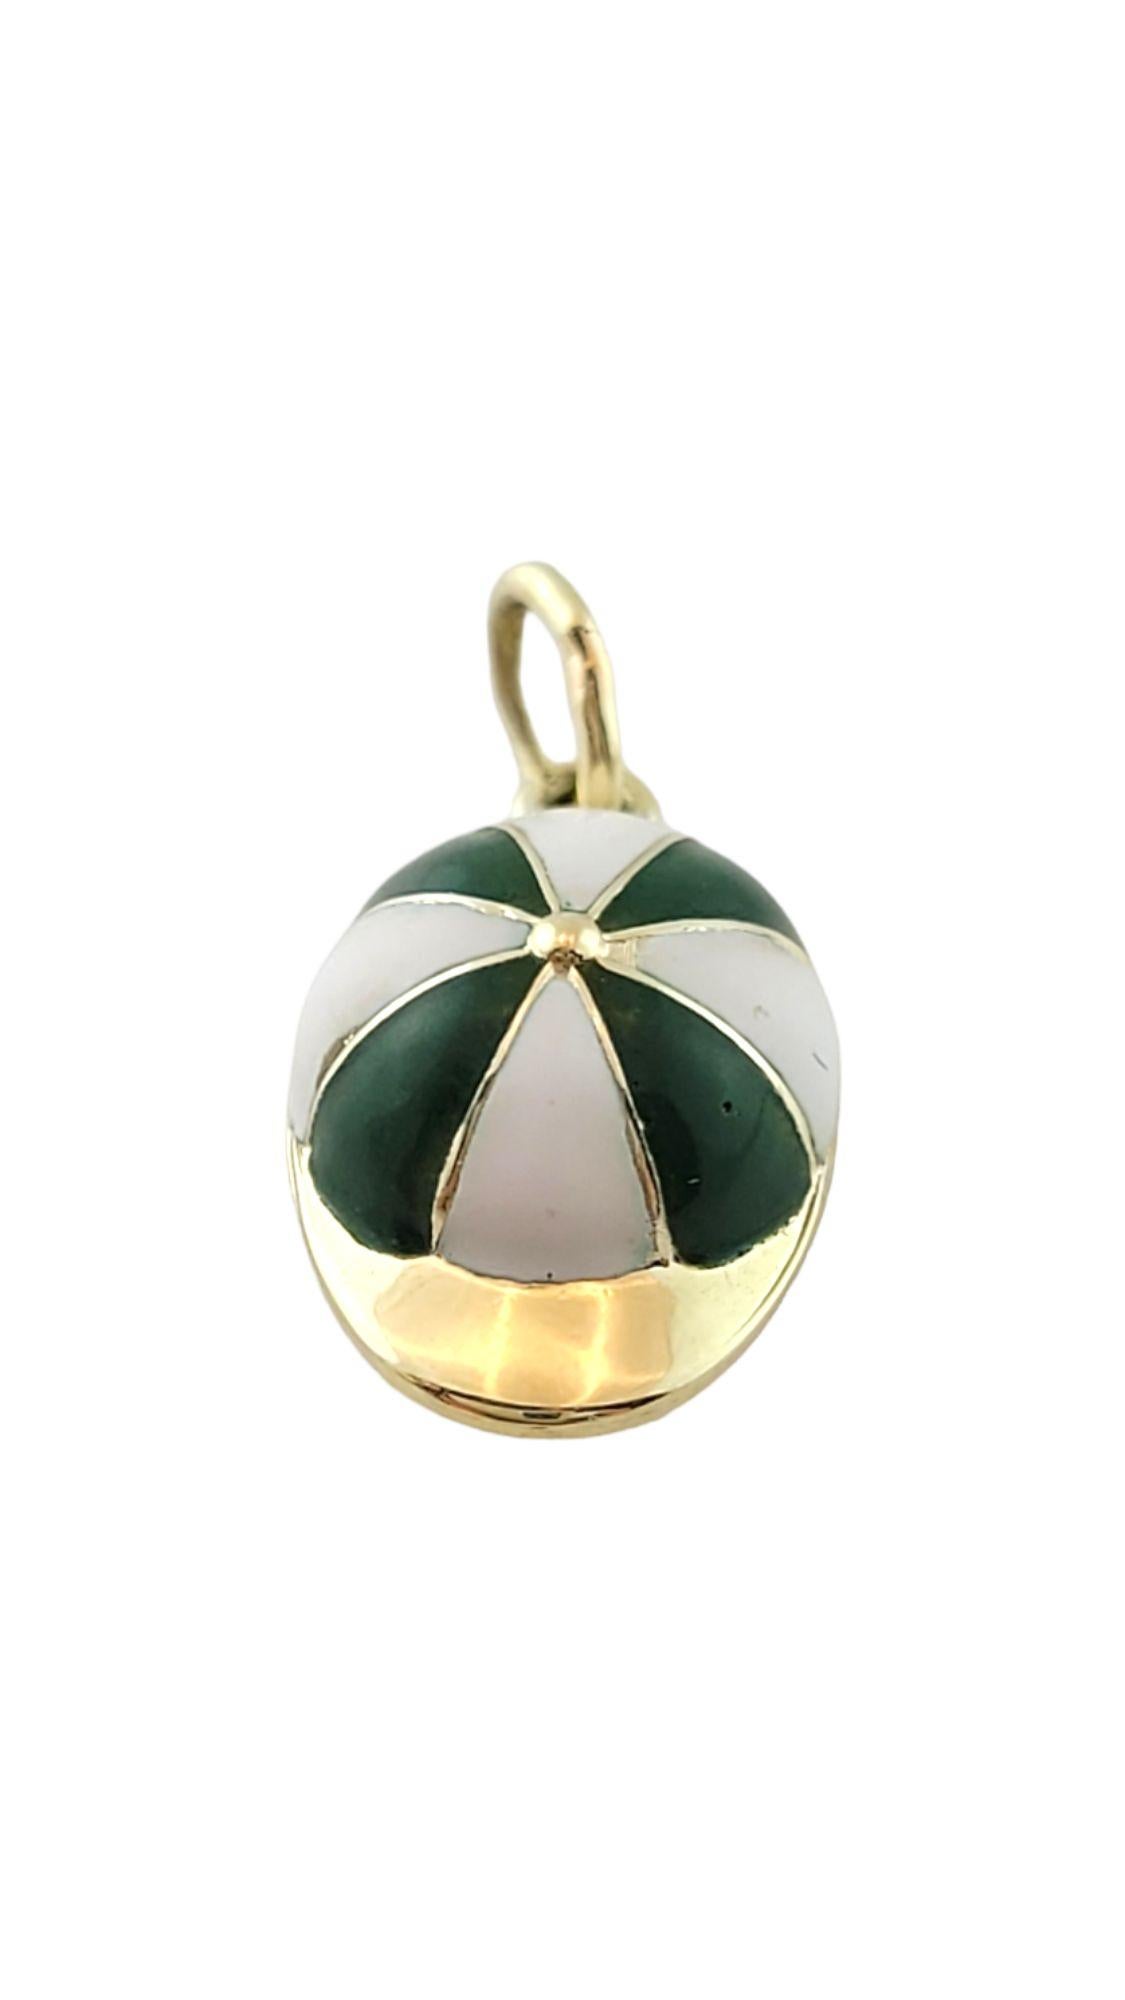 This vintage jockey cap features green and white striped enamel in 10K yellow gold.

Size: 15.6 mm X 9.5 mm

Weight: 0.9 g/ 0.6 dwt

Hallmark: 10K

Very good condition, professionally polished.

Will come packaged in a gift box or pouch (when